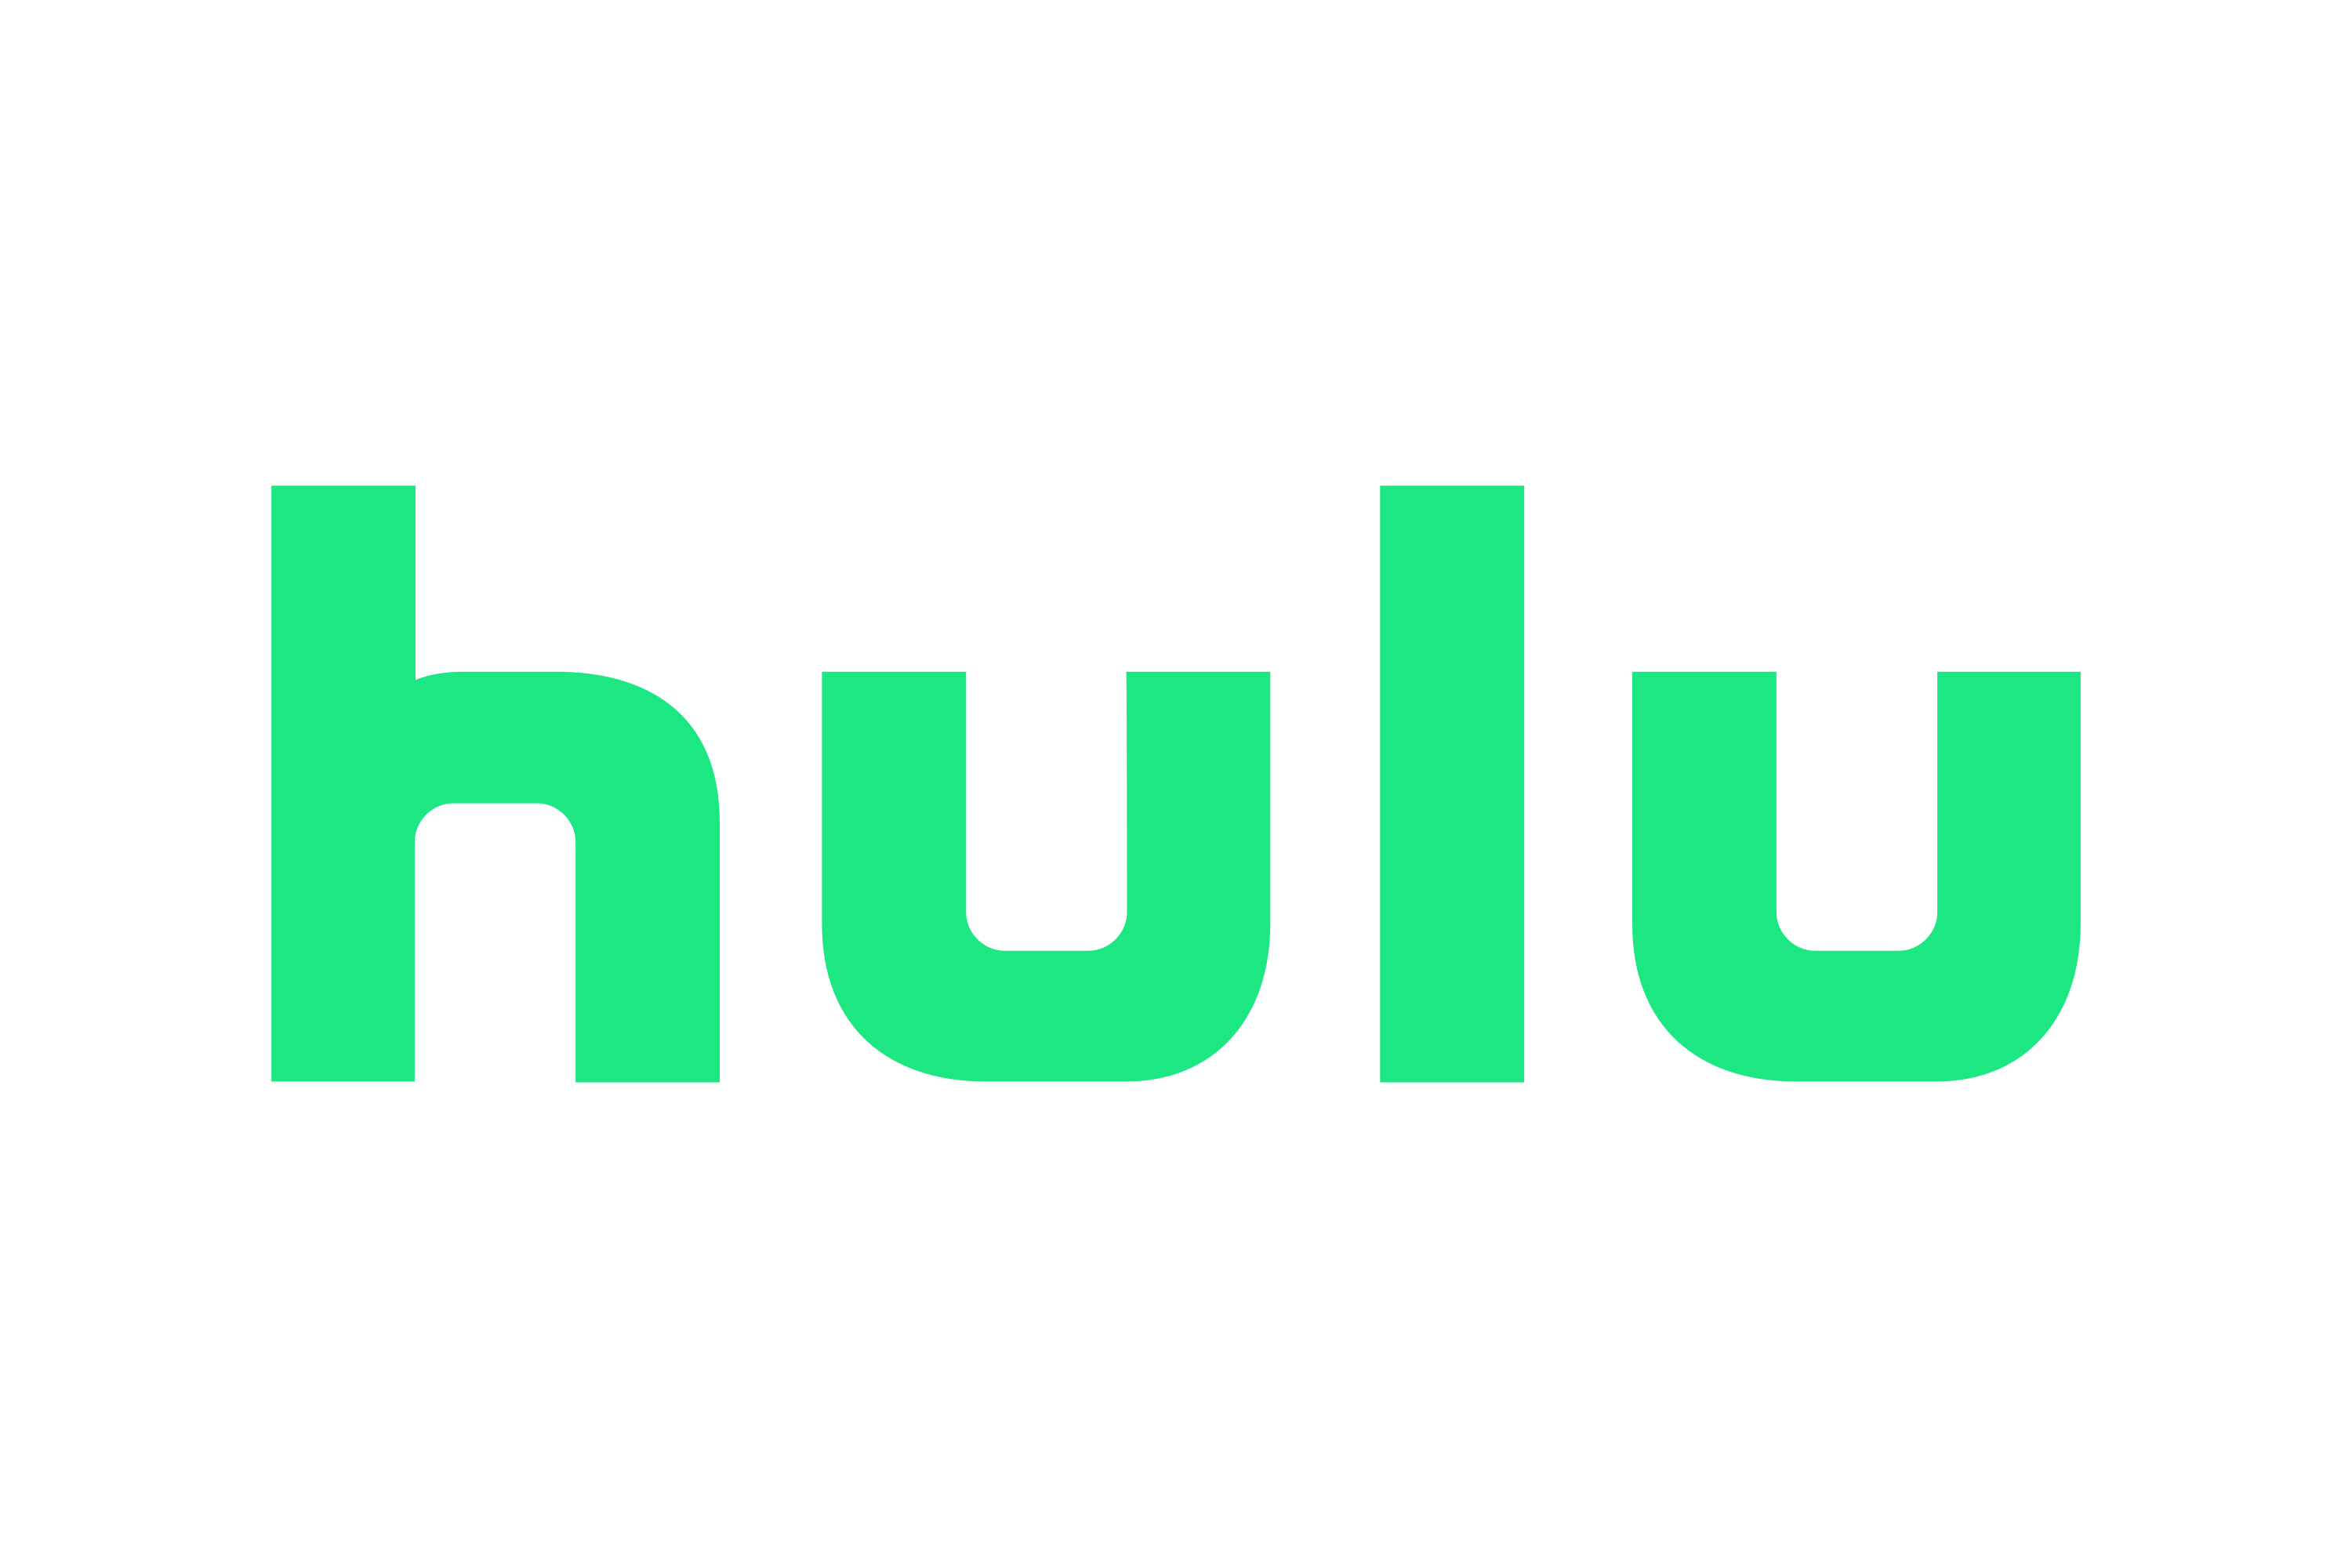 Watch Hulu for the latest shows and movies